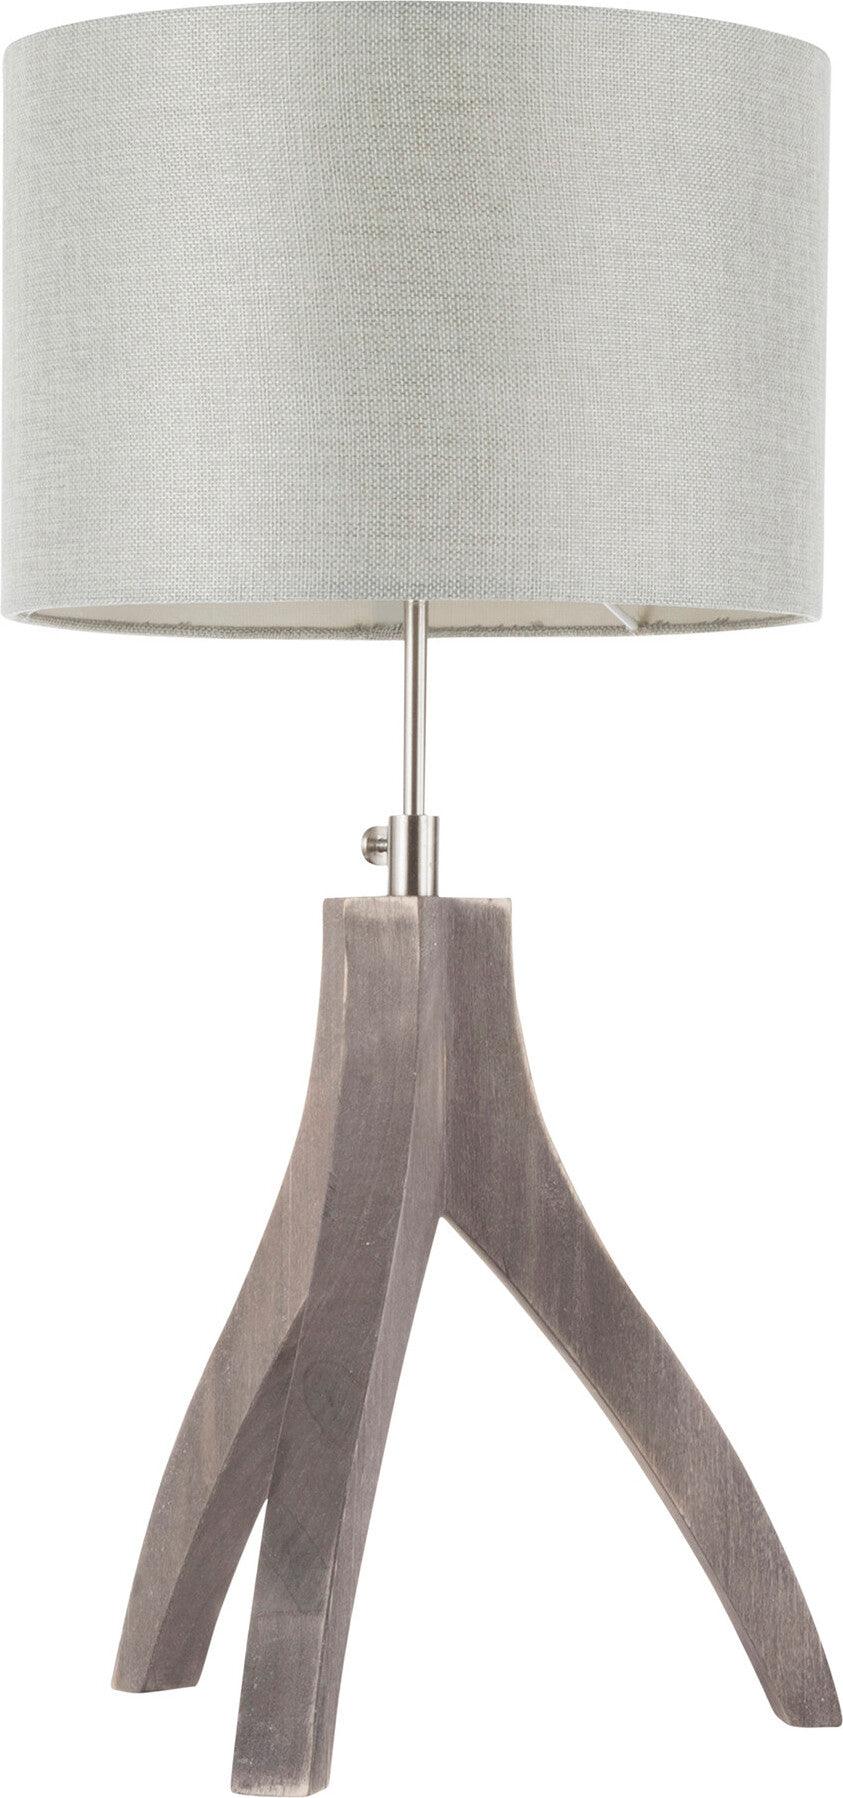 Lumisource Table Lamps - Wishbone Table Lamp & Light Gray